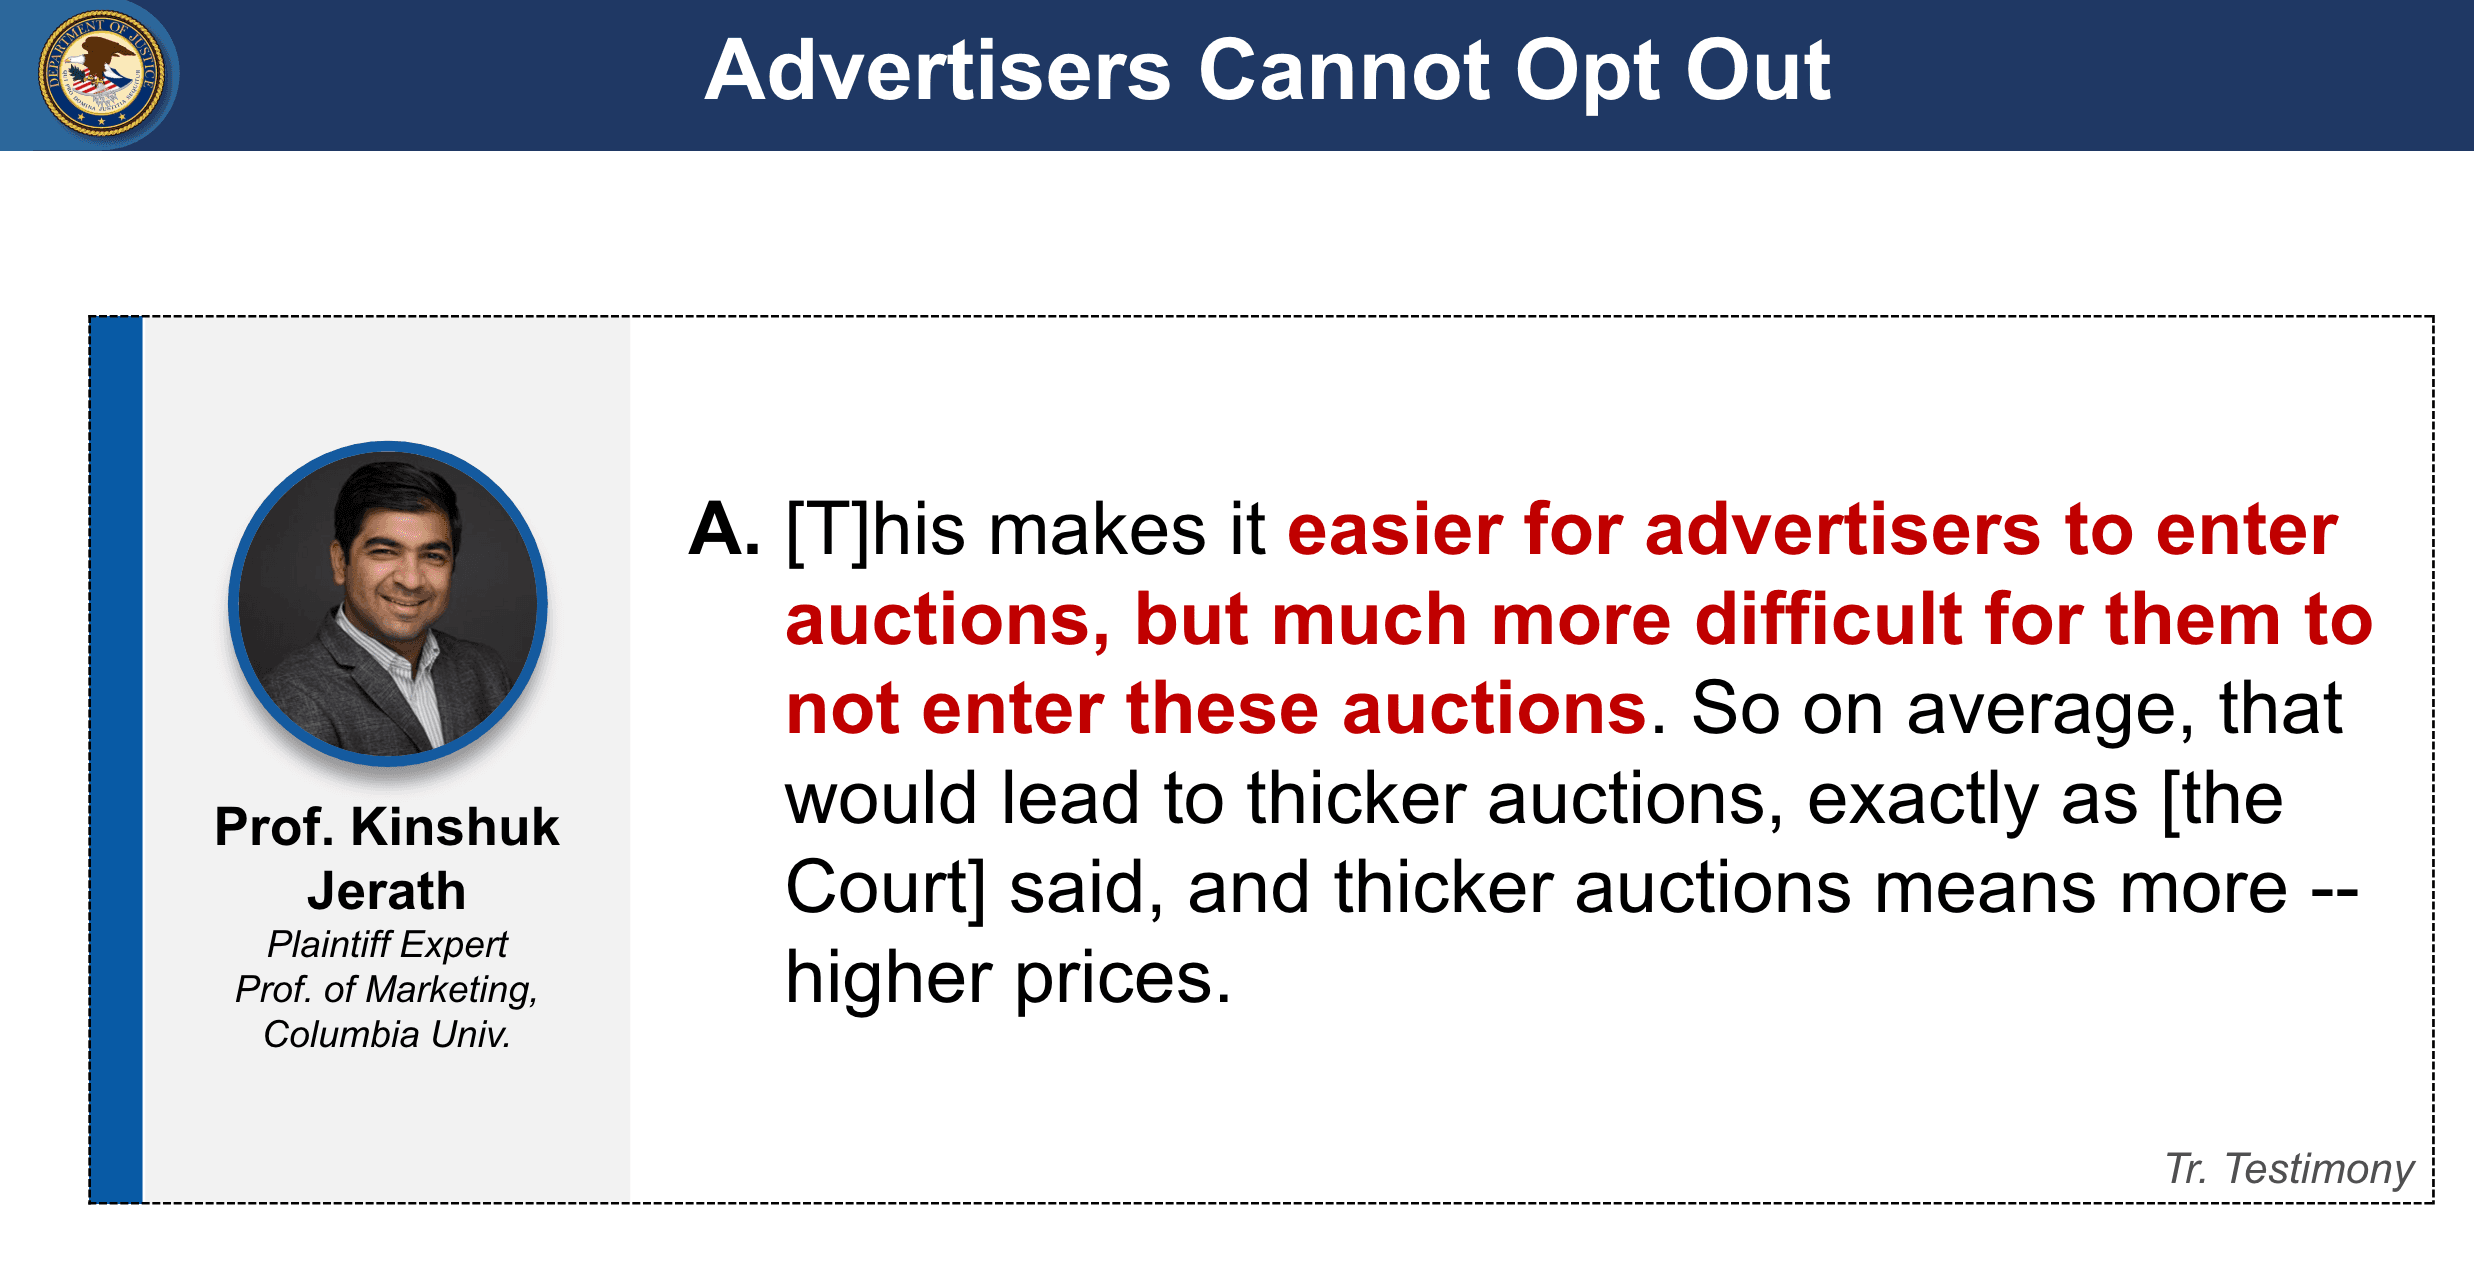 Broad match campaigns advertisers cannot opt out